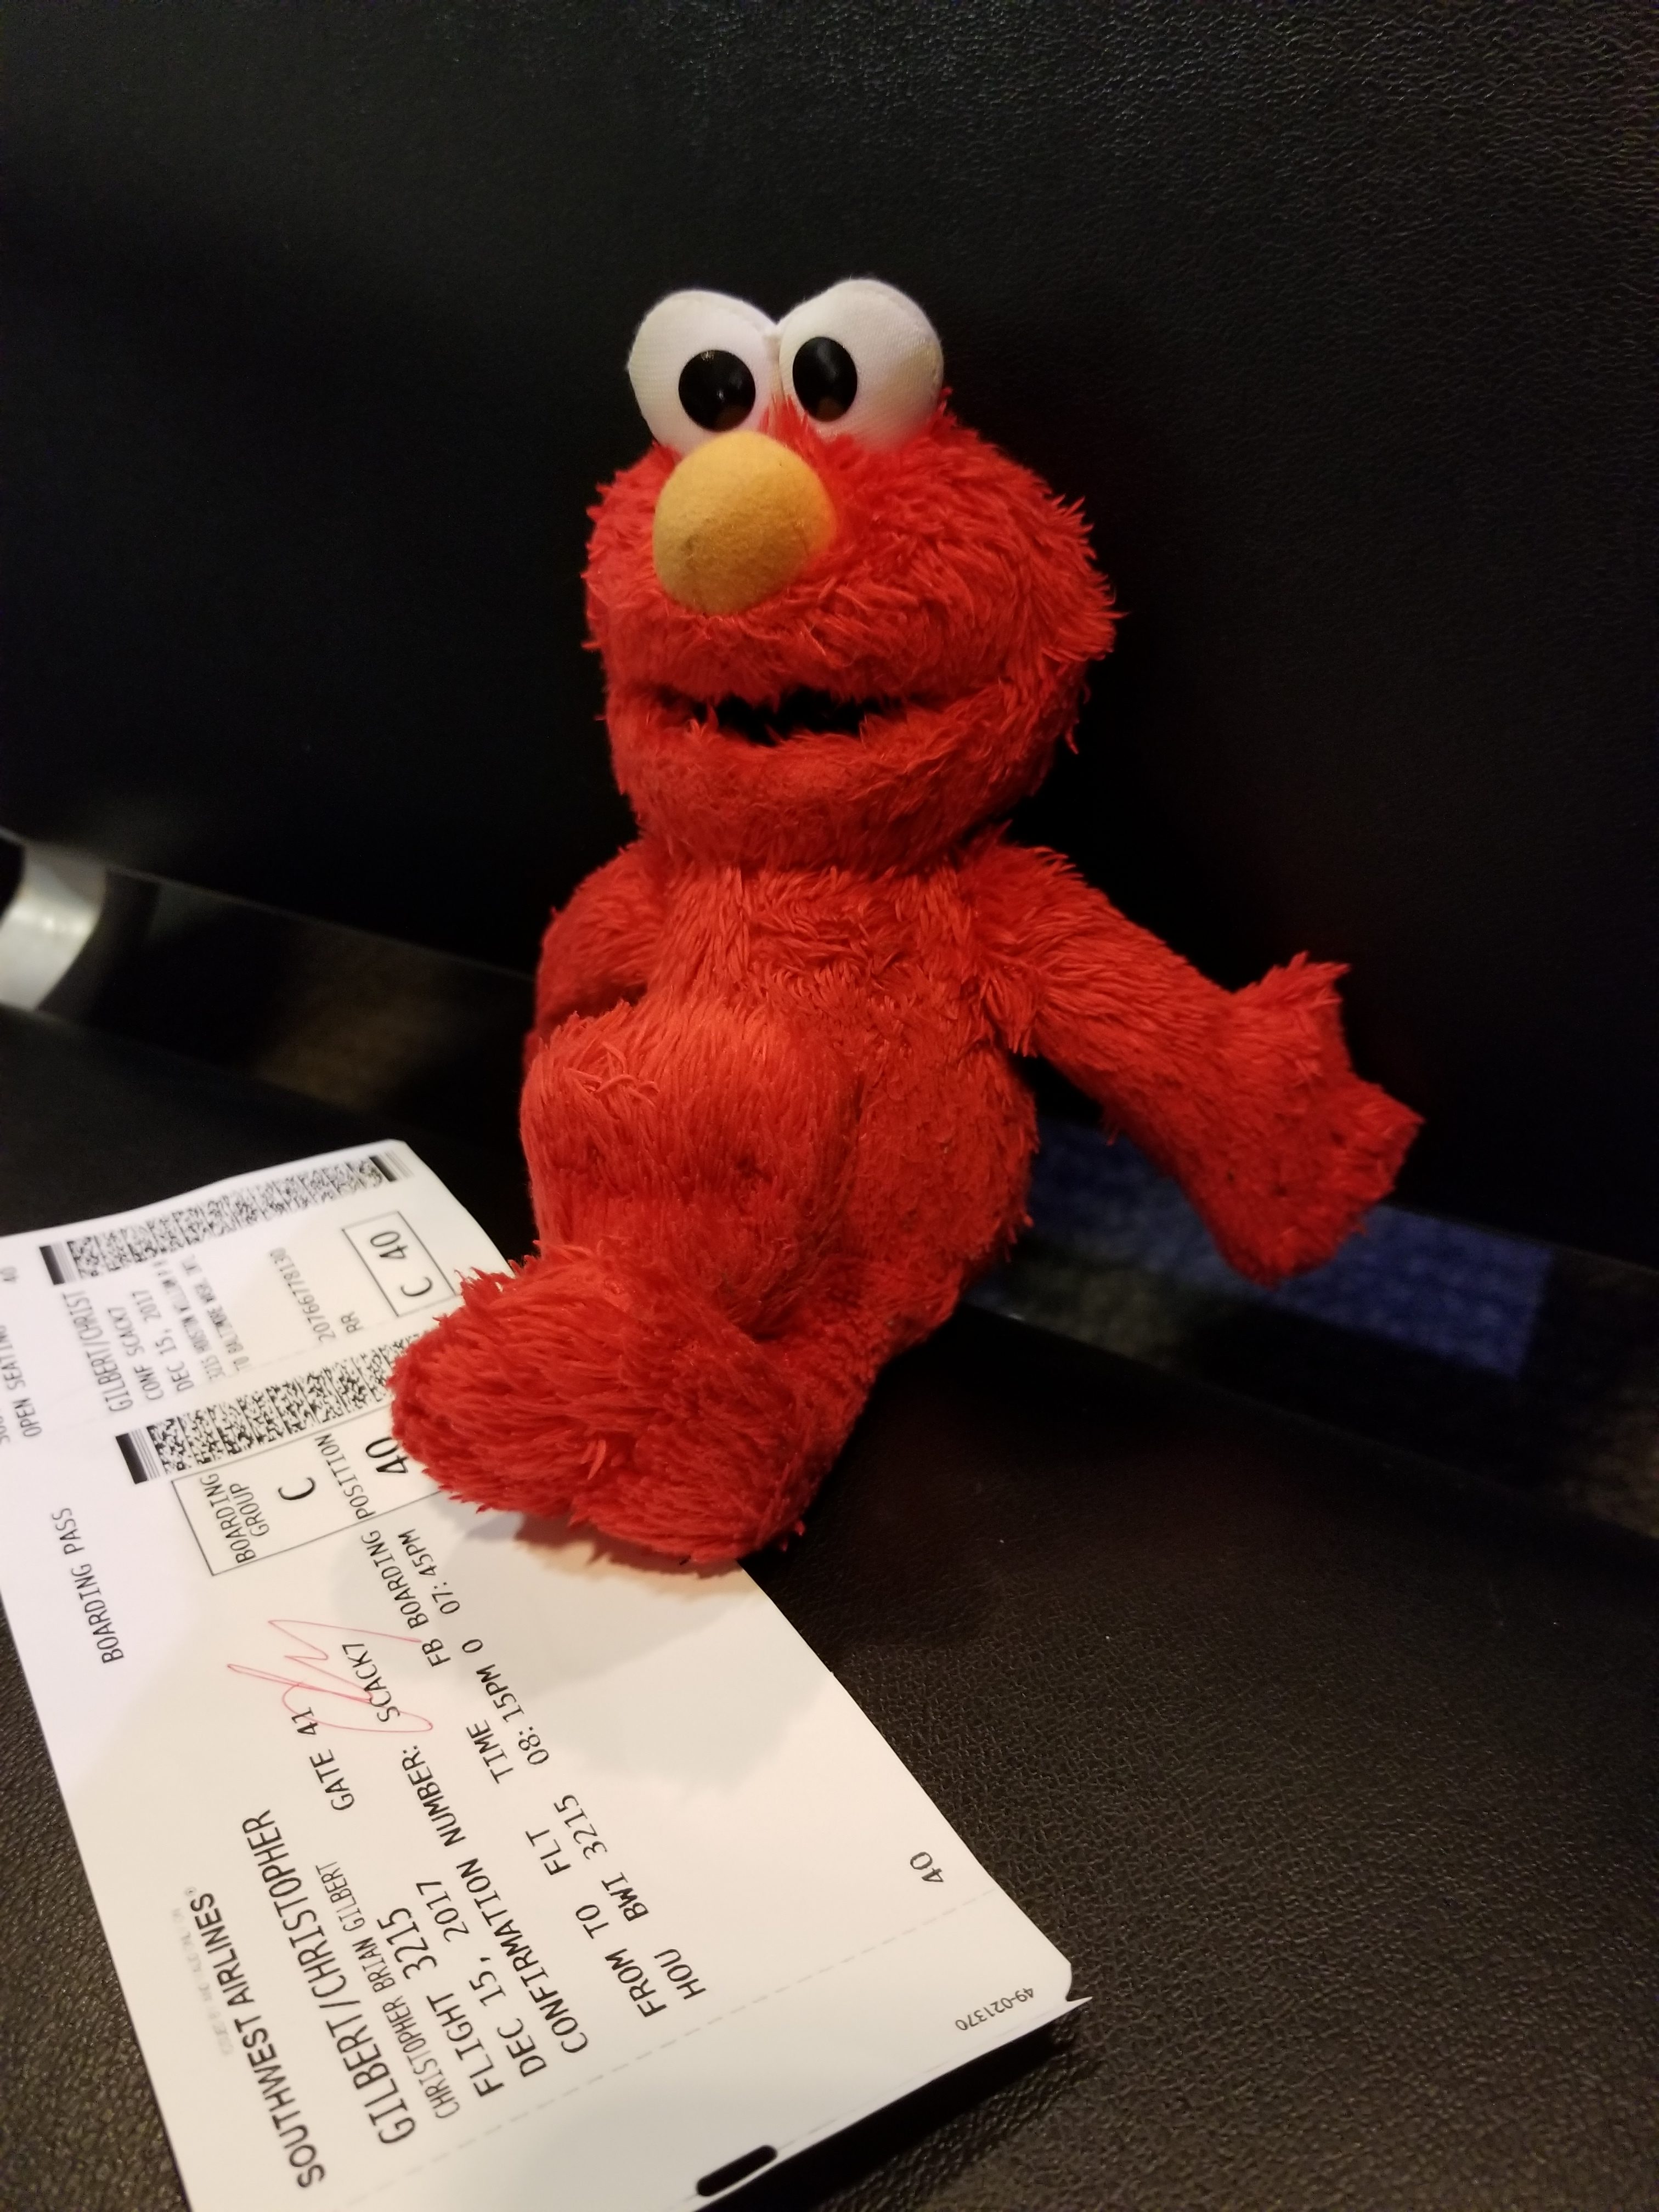 Elmo waits for his boarding call